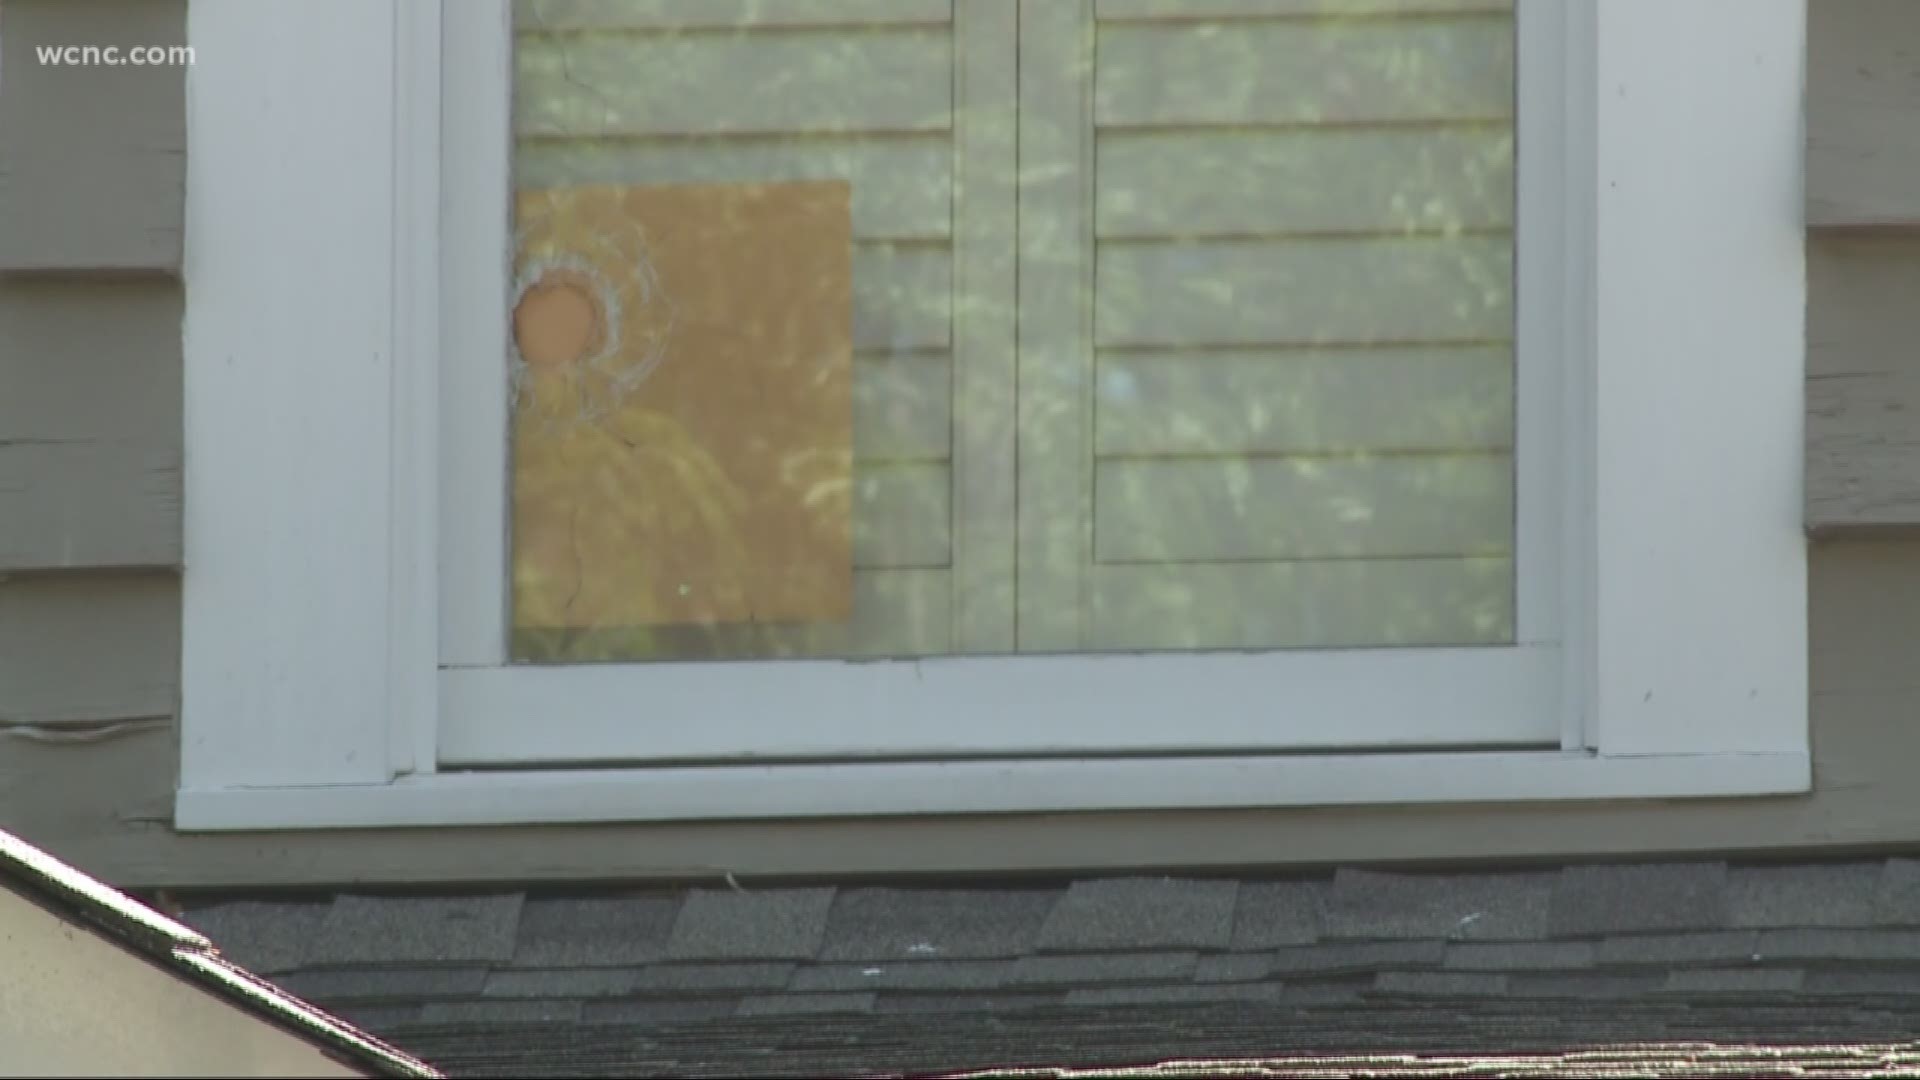 A neighborhood is on edge after a stray bullet went inside a family's home in Dilworth.